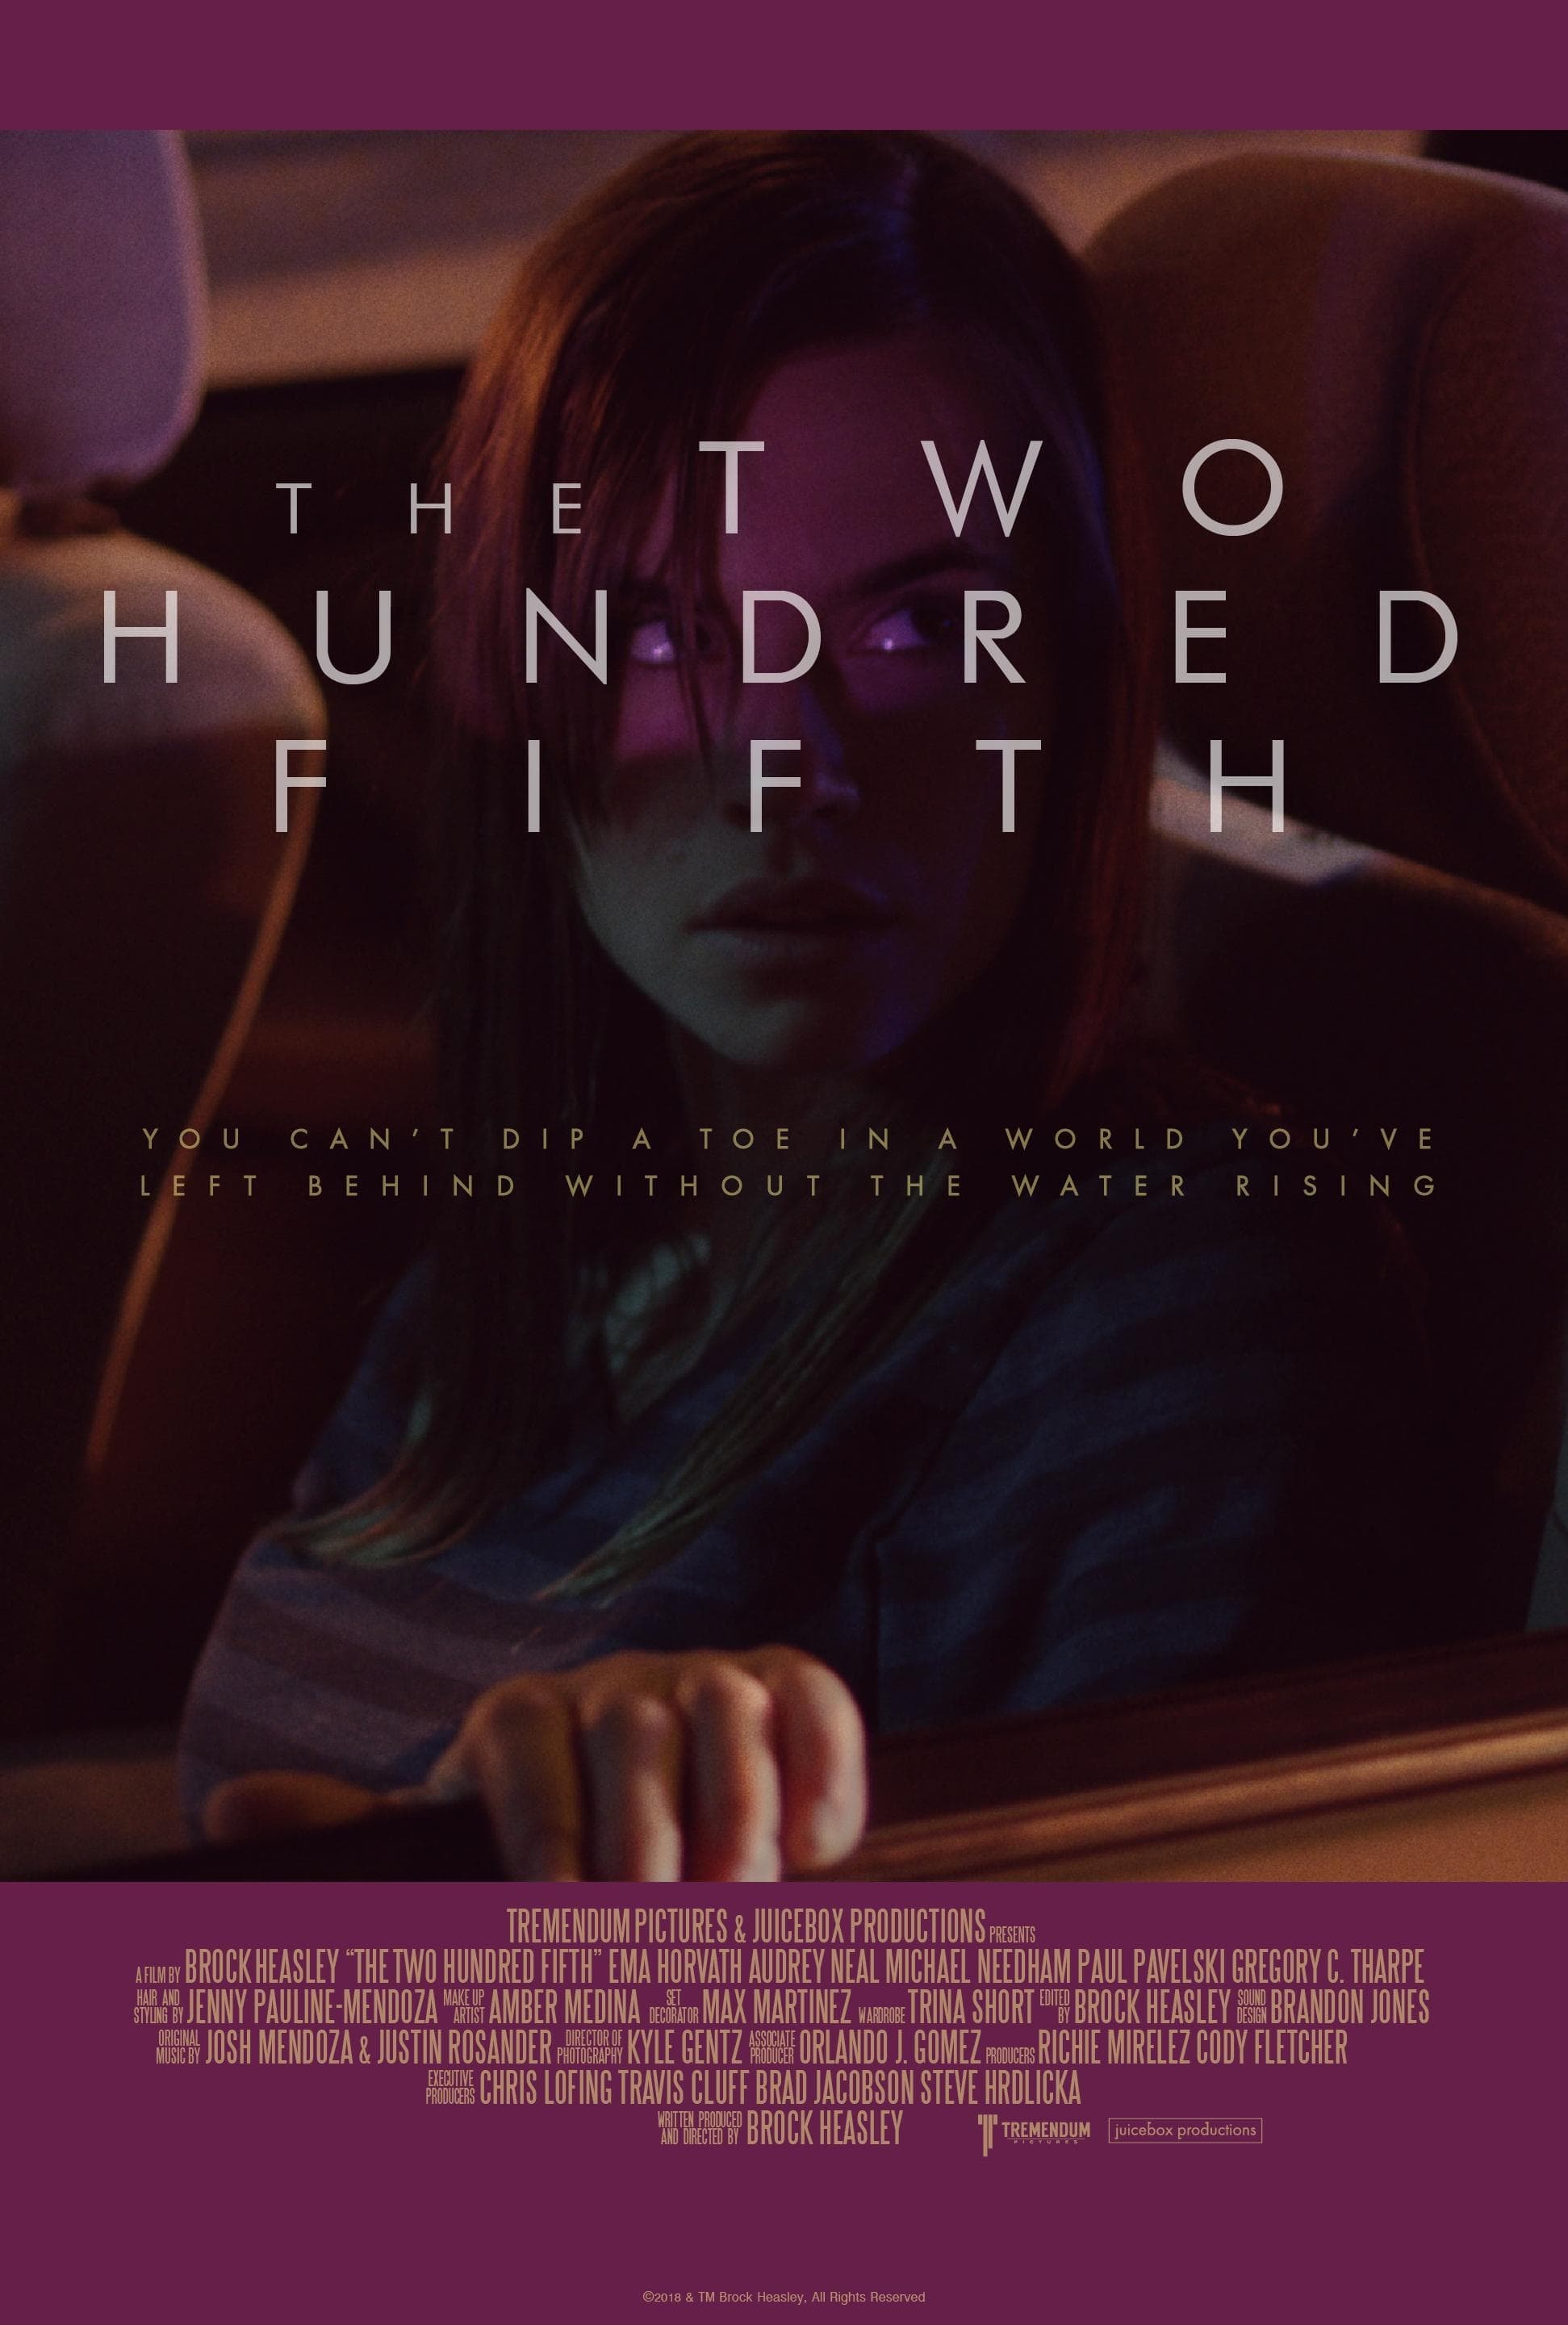 The Two Hundred Fifth film